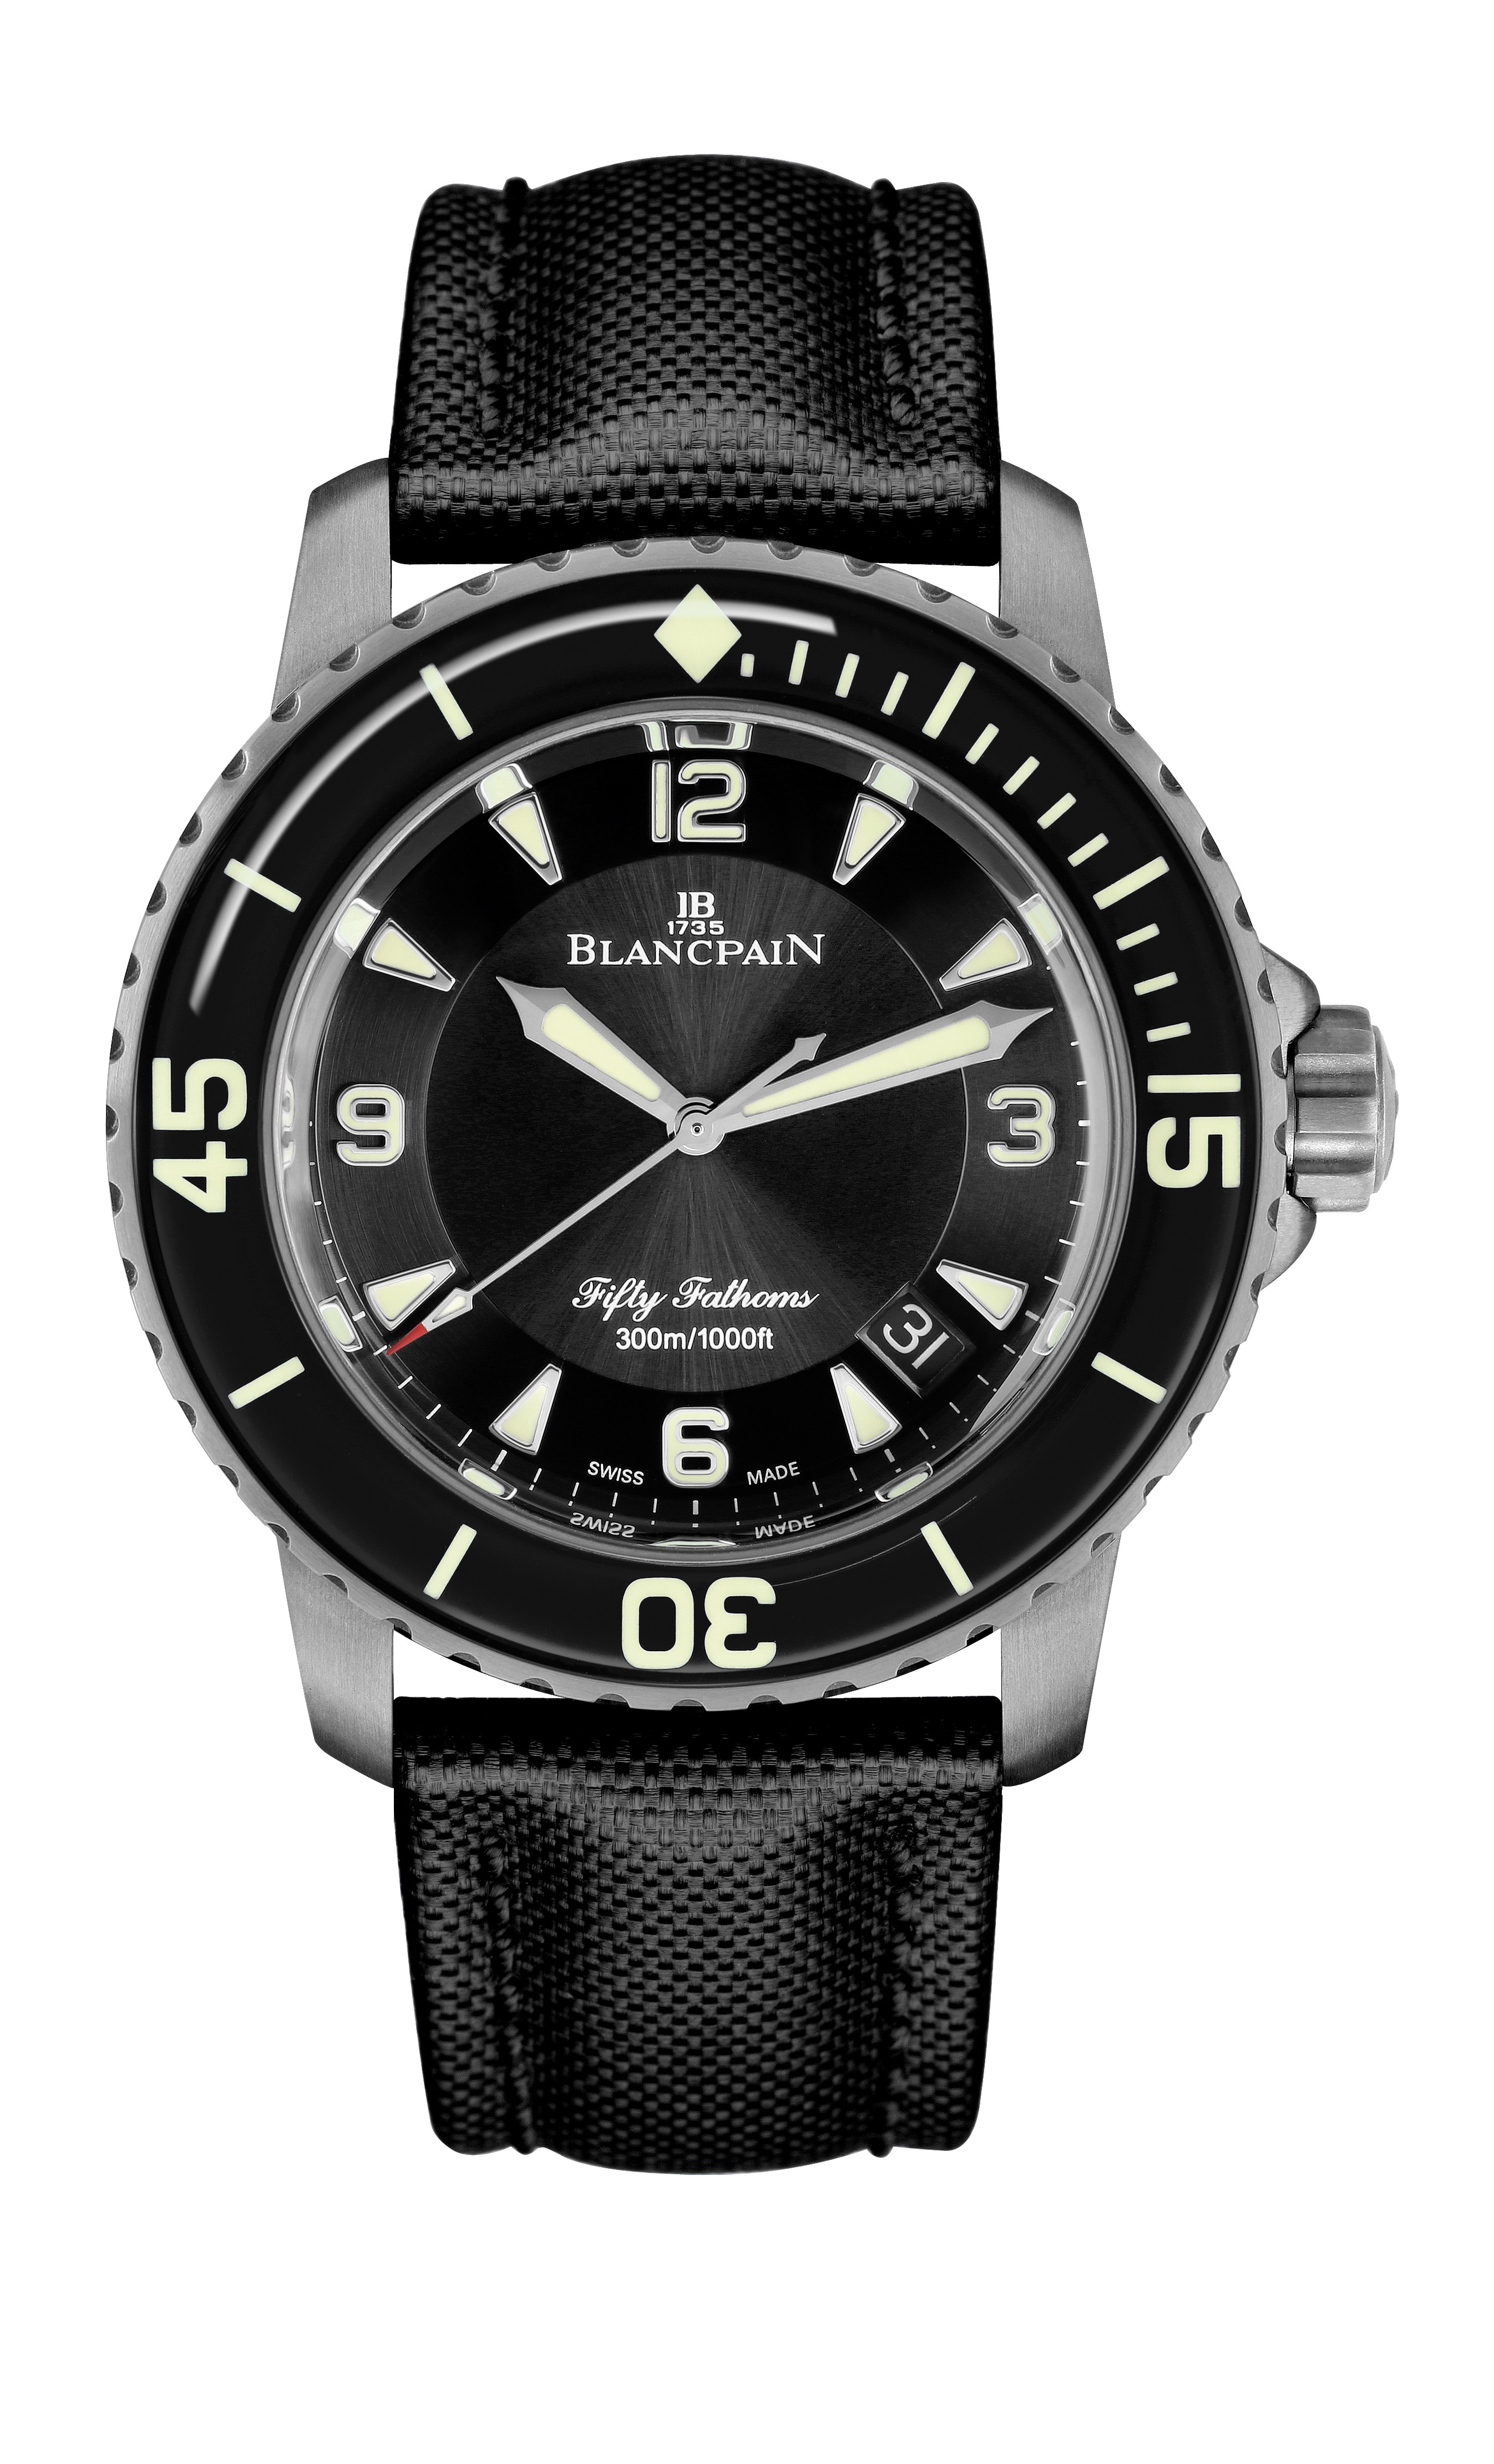 Blancpain’s Fifty Fathoms diver’s watch, first introduced in 1953, has had a titanium makeover.